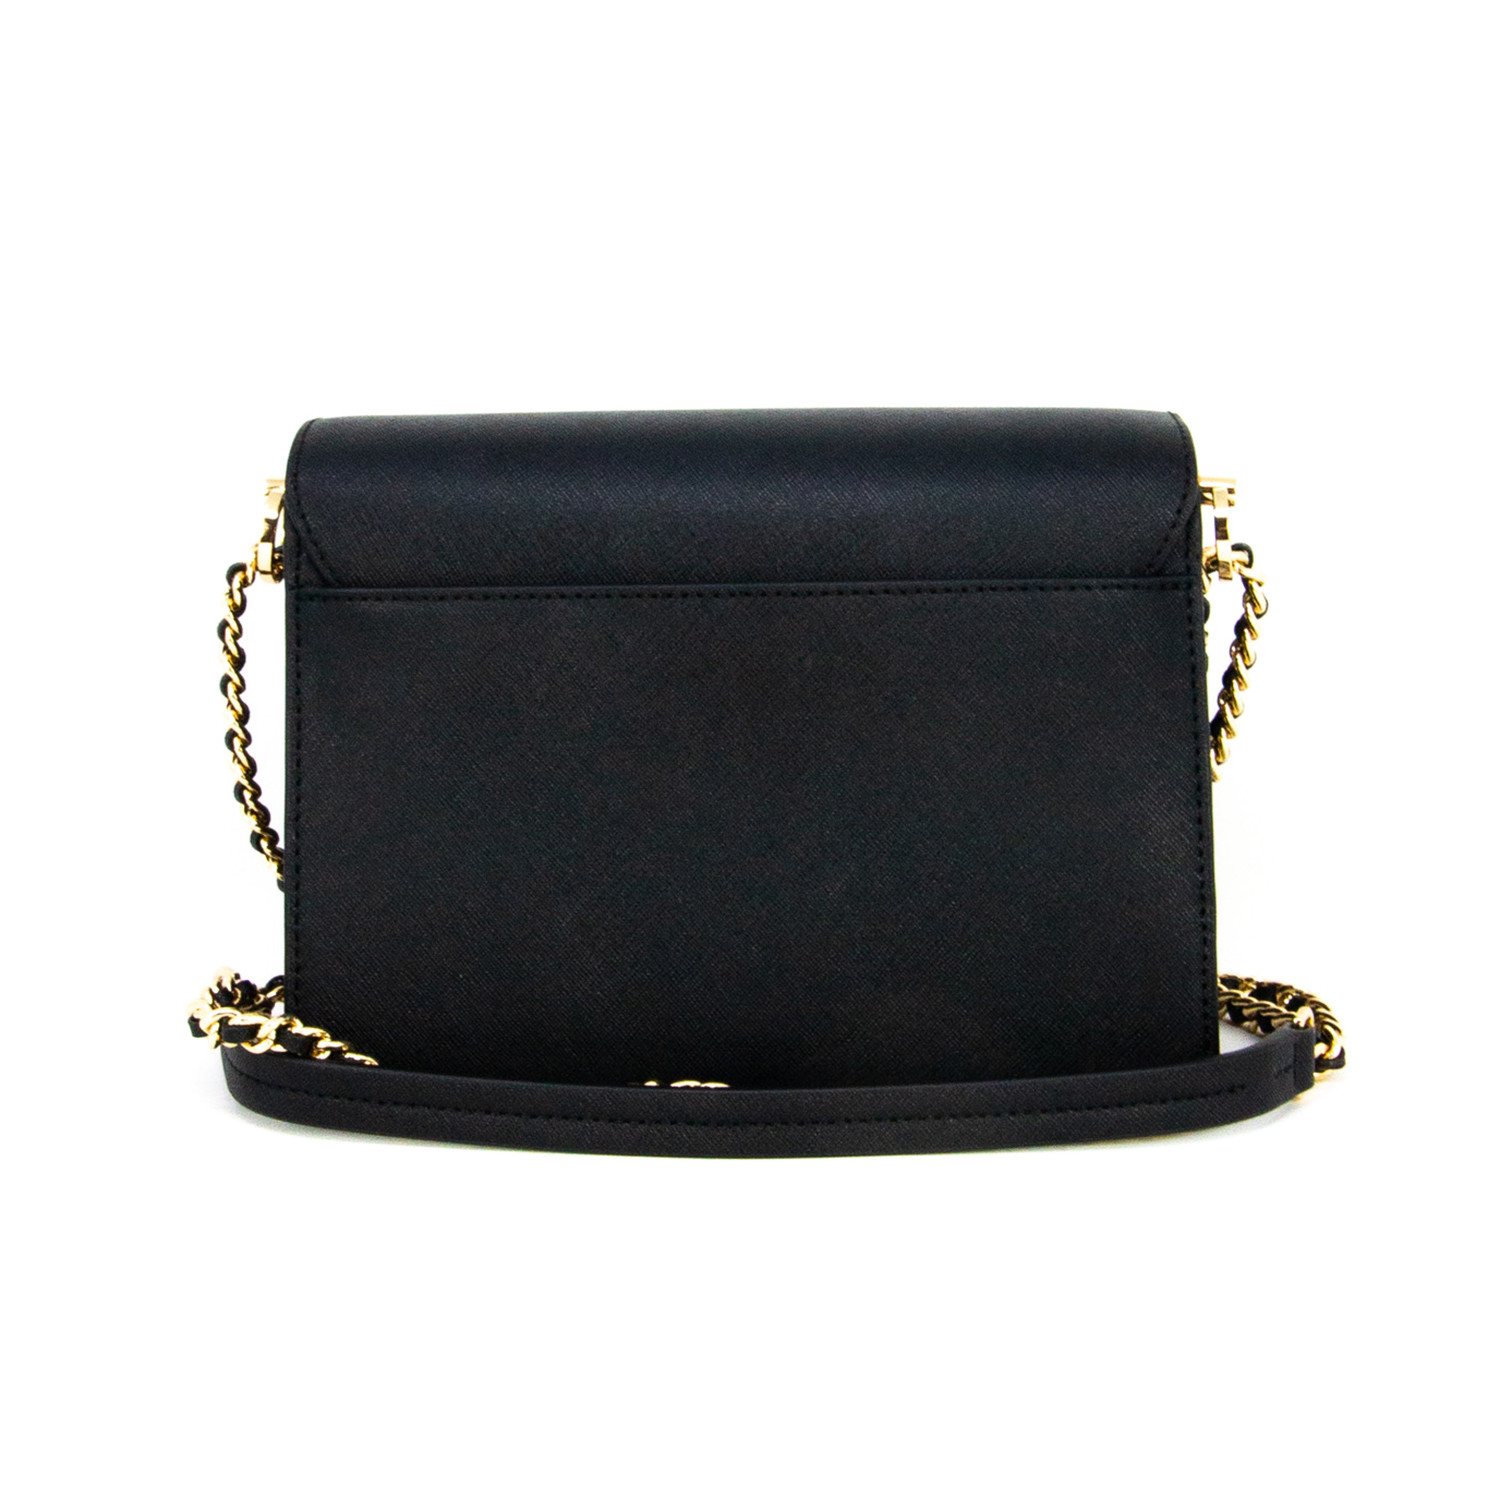 Robinson Convertible Shoulder Bag // Black - Tory Burch - Touch of Modern